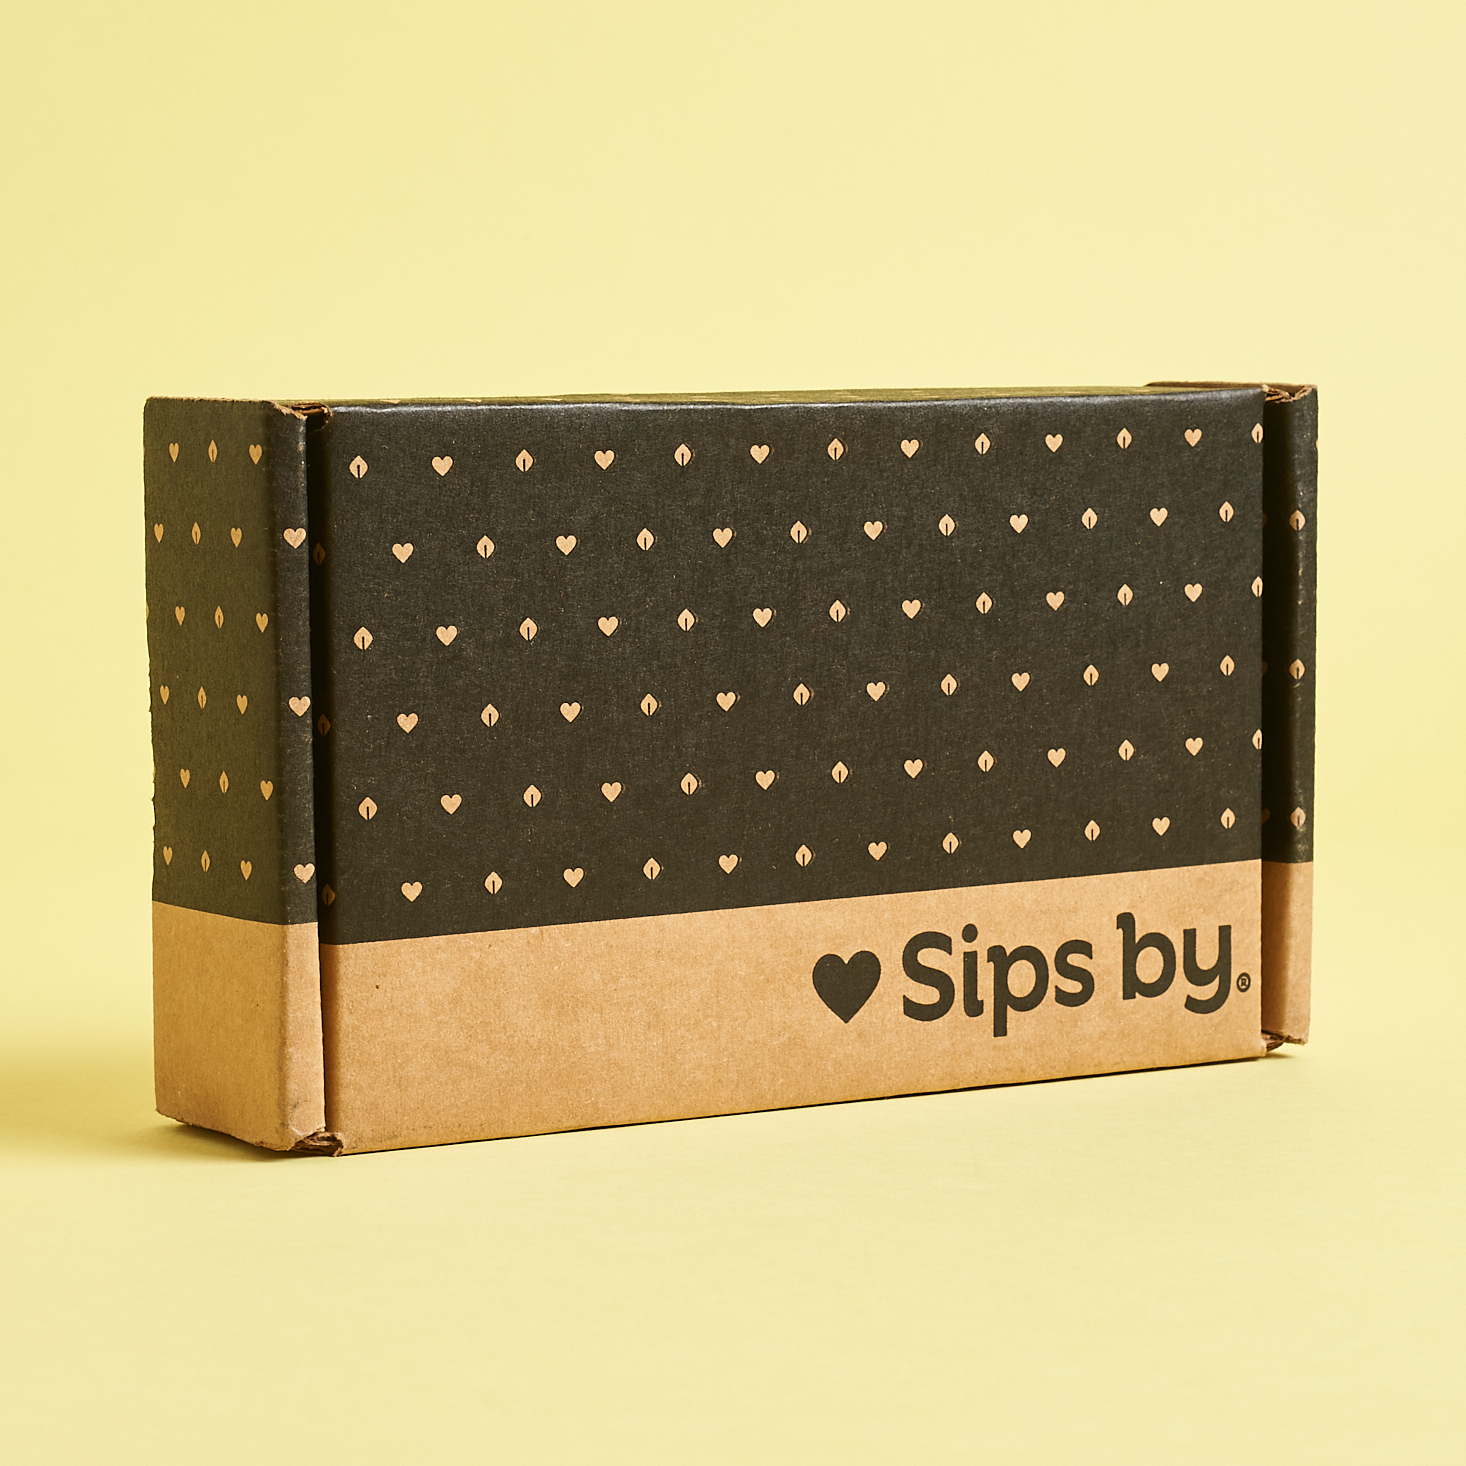 Sips By has a Black Friday 2021 Deal available now: Get your first box for $1